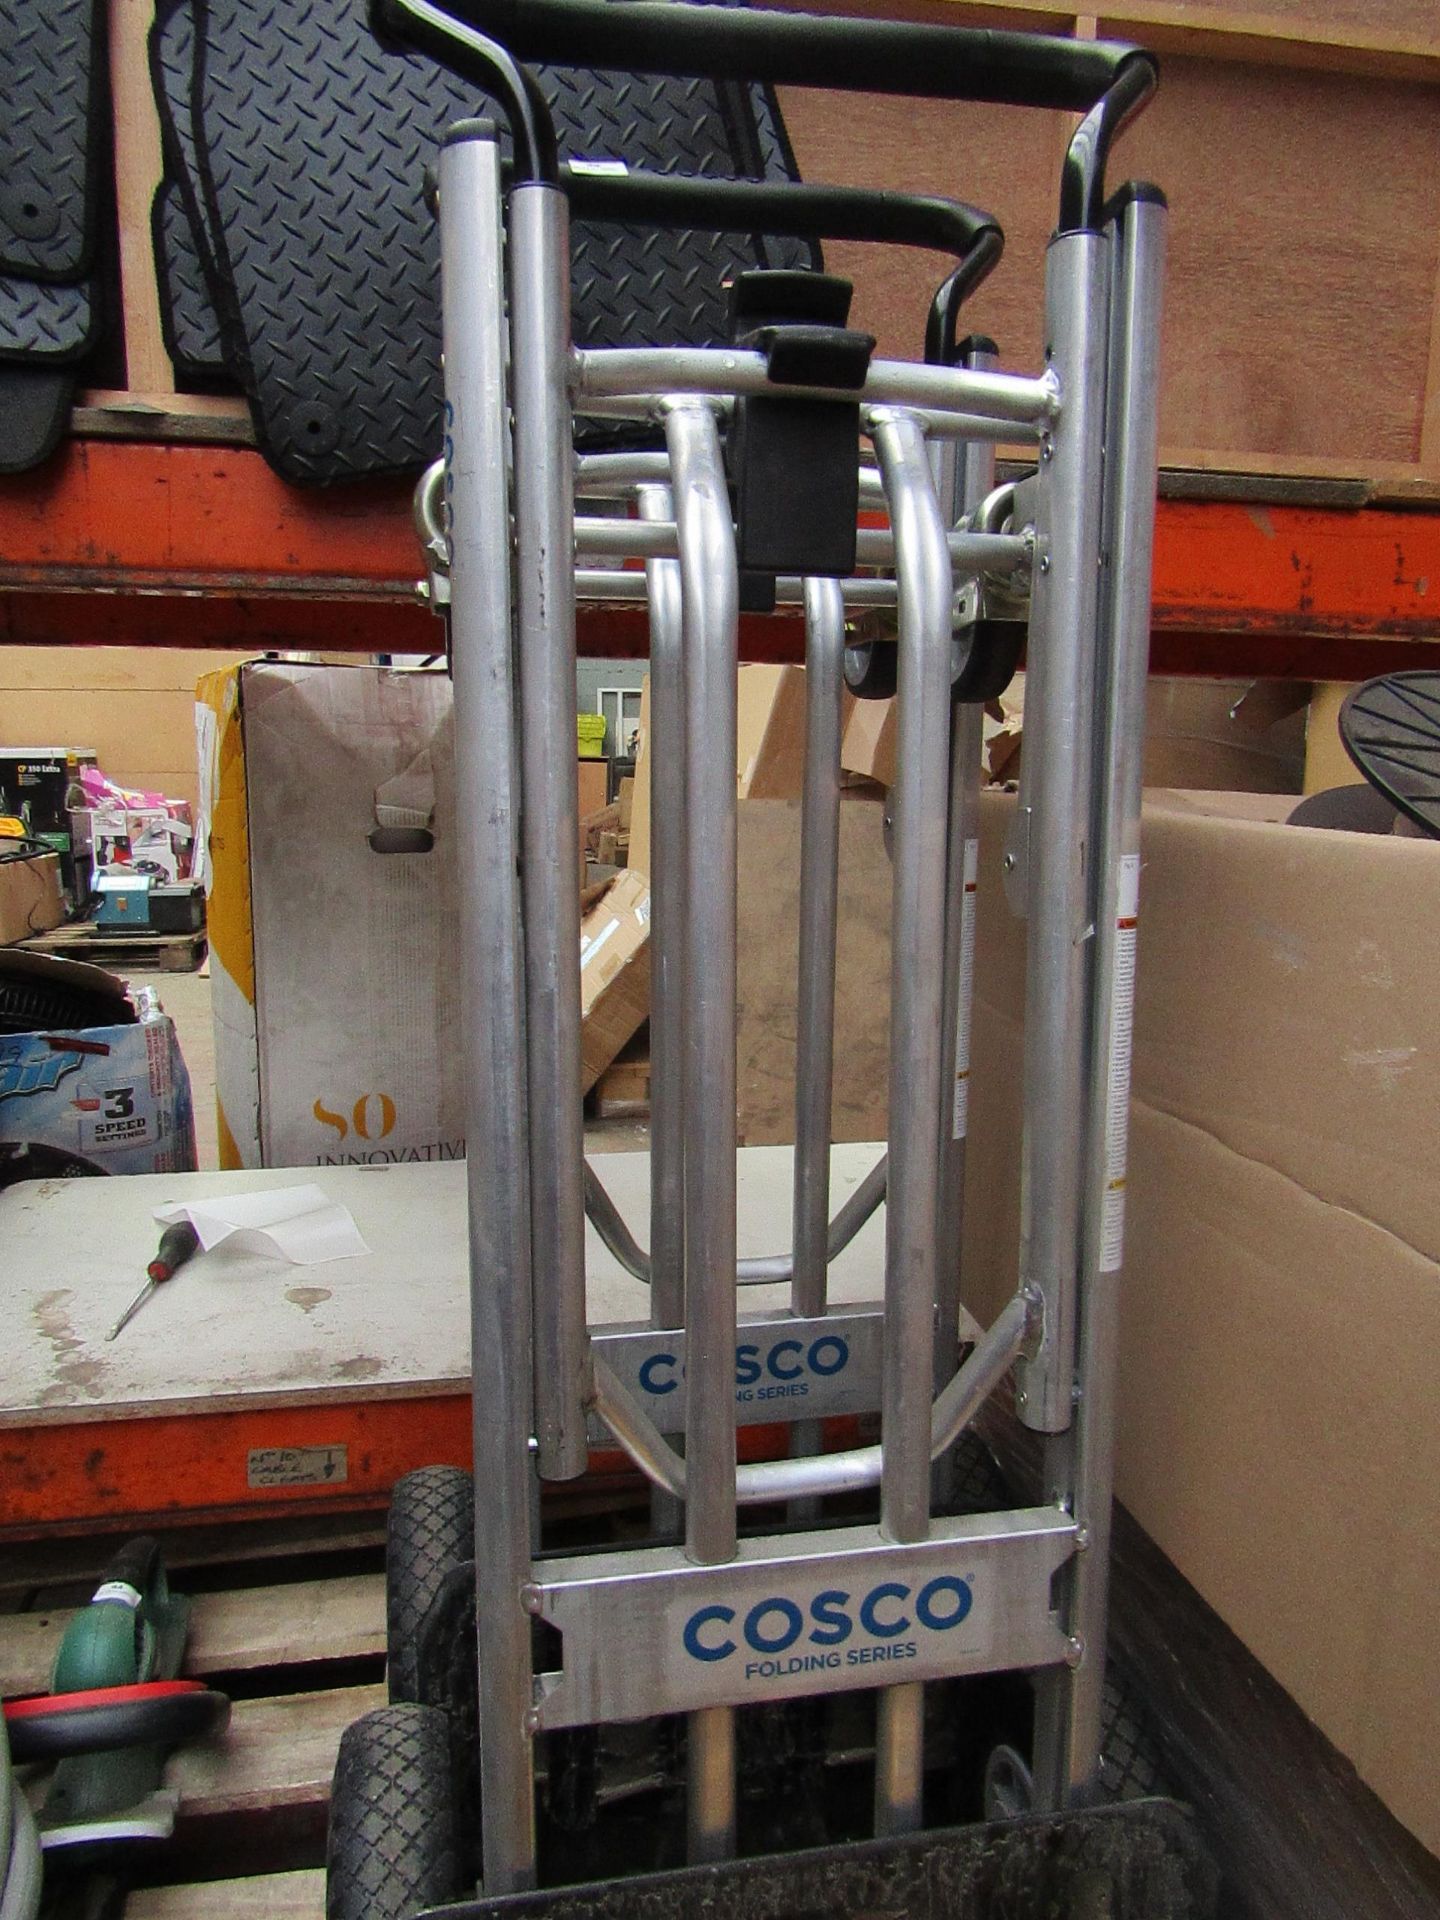 Cosco - Folding Series Hand truck - ( S.W.L 350kg ) - Used Condition, Still Very Usable, No